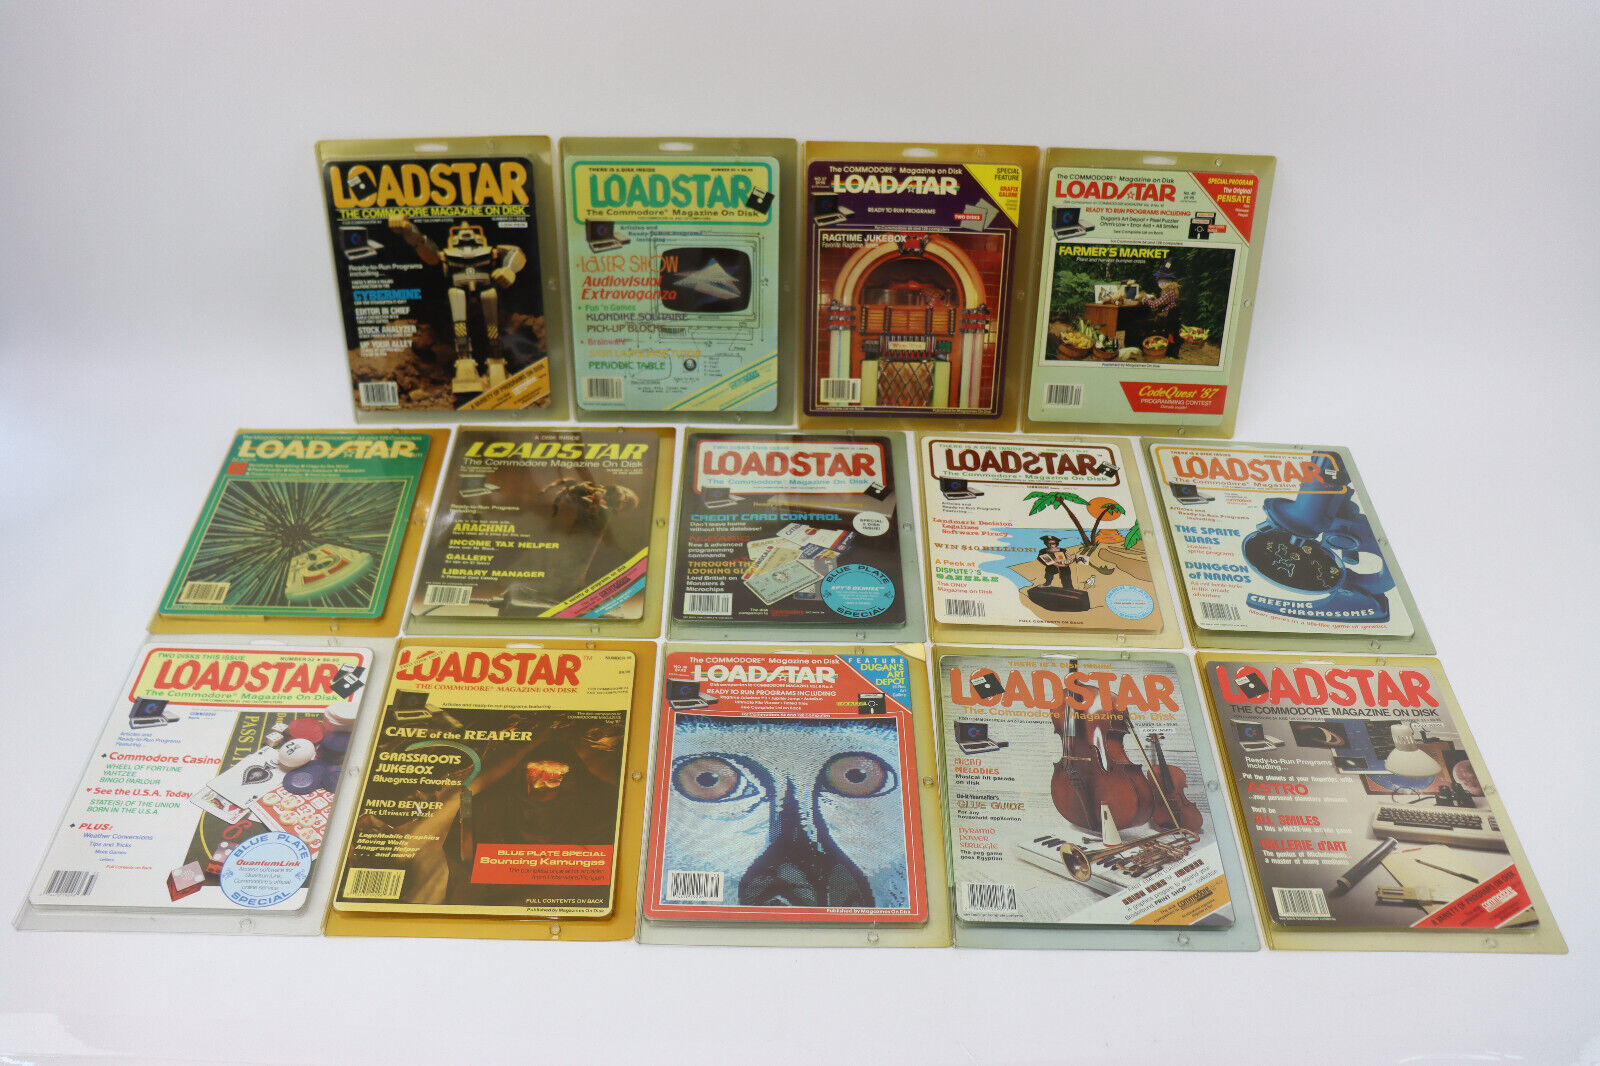 Lot of 14 NOS Vintage 80s Loadstar Commodore C64/128 Magazines on Disk